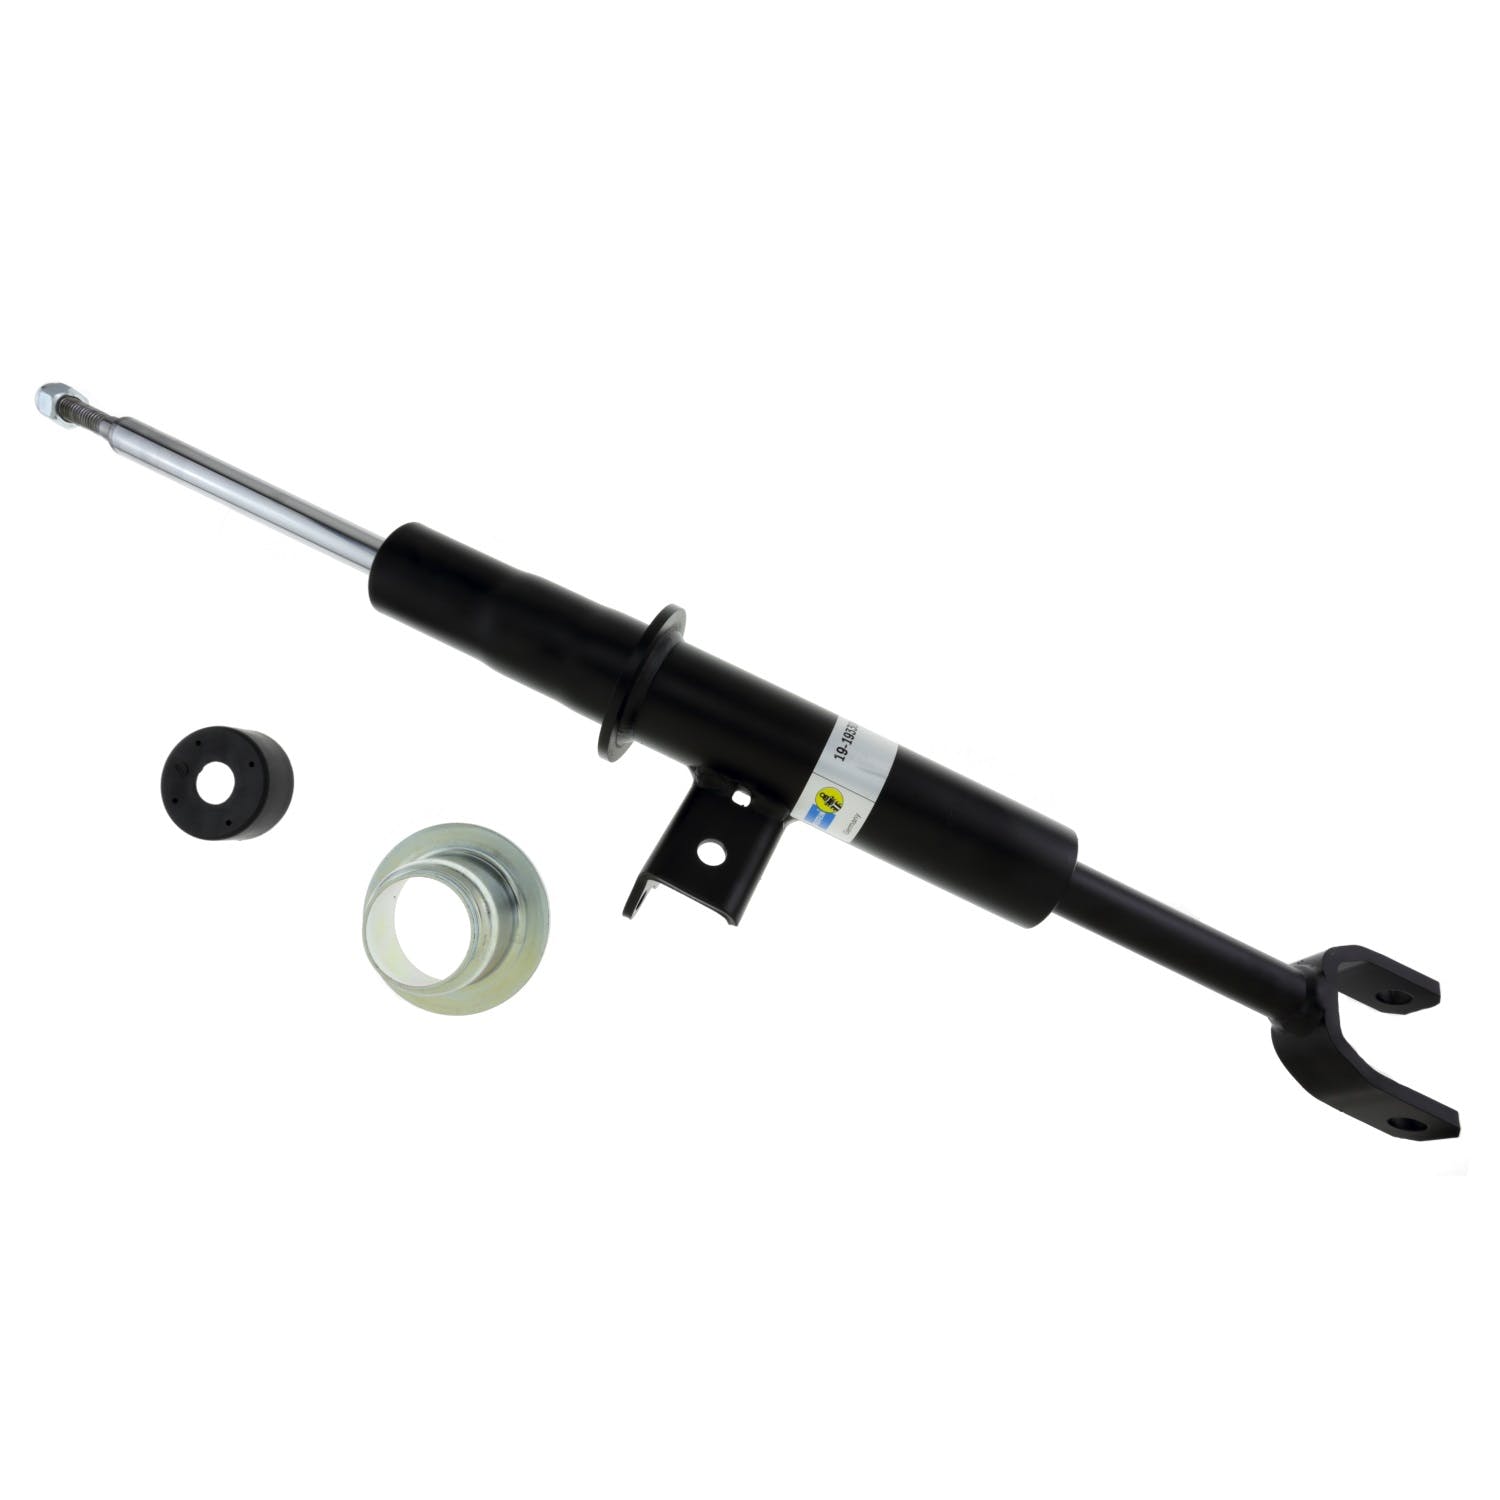 Bilstein 19-193304 B4 OE Replacement-Suspension Strut Assembly